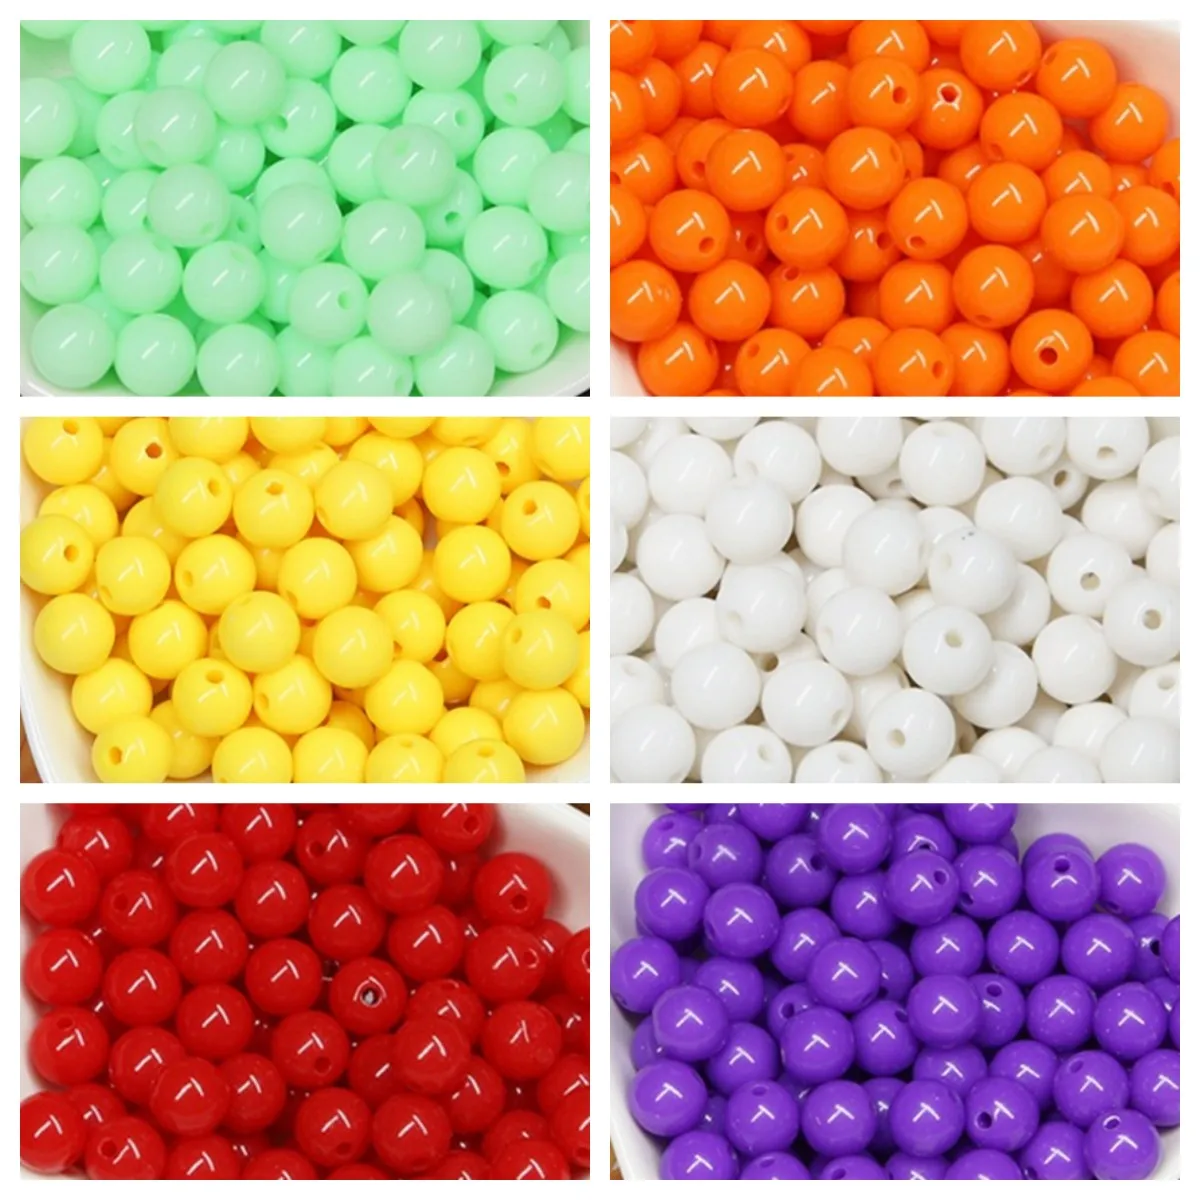 

4mm Candy Color Acrylic Round Beads 3-12mm Loose Balls Spacer beads for needlework & Jewelry Making